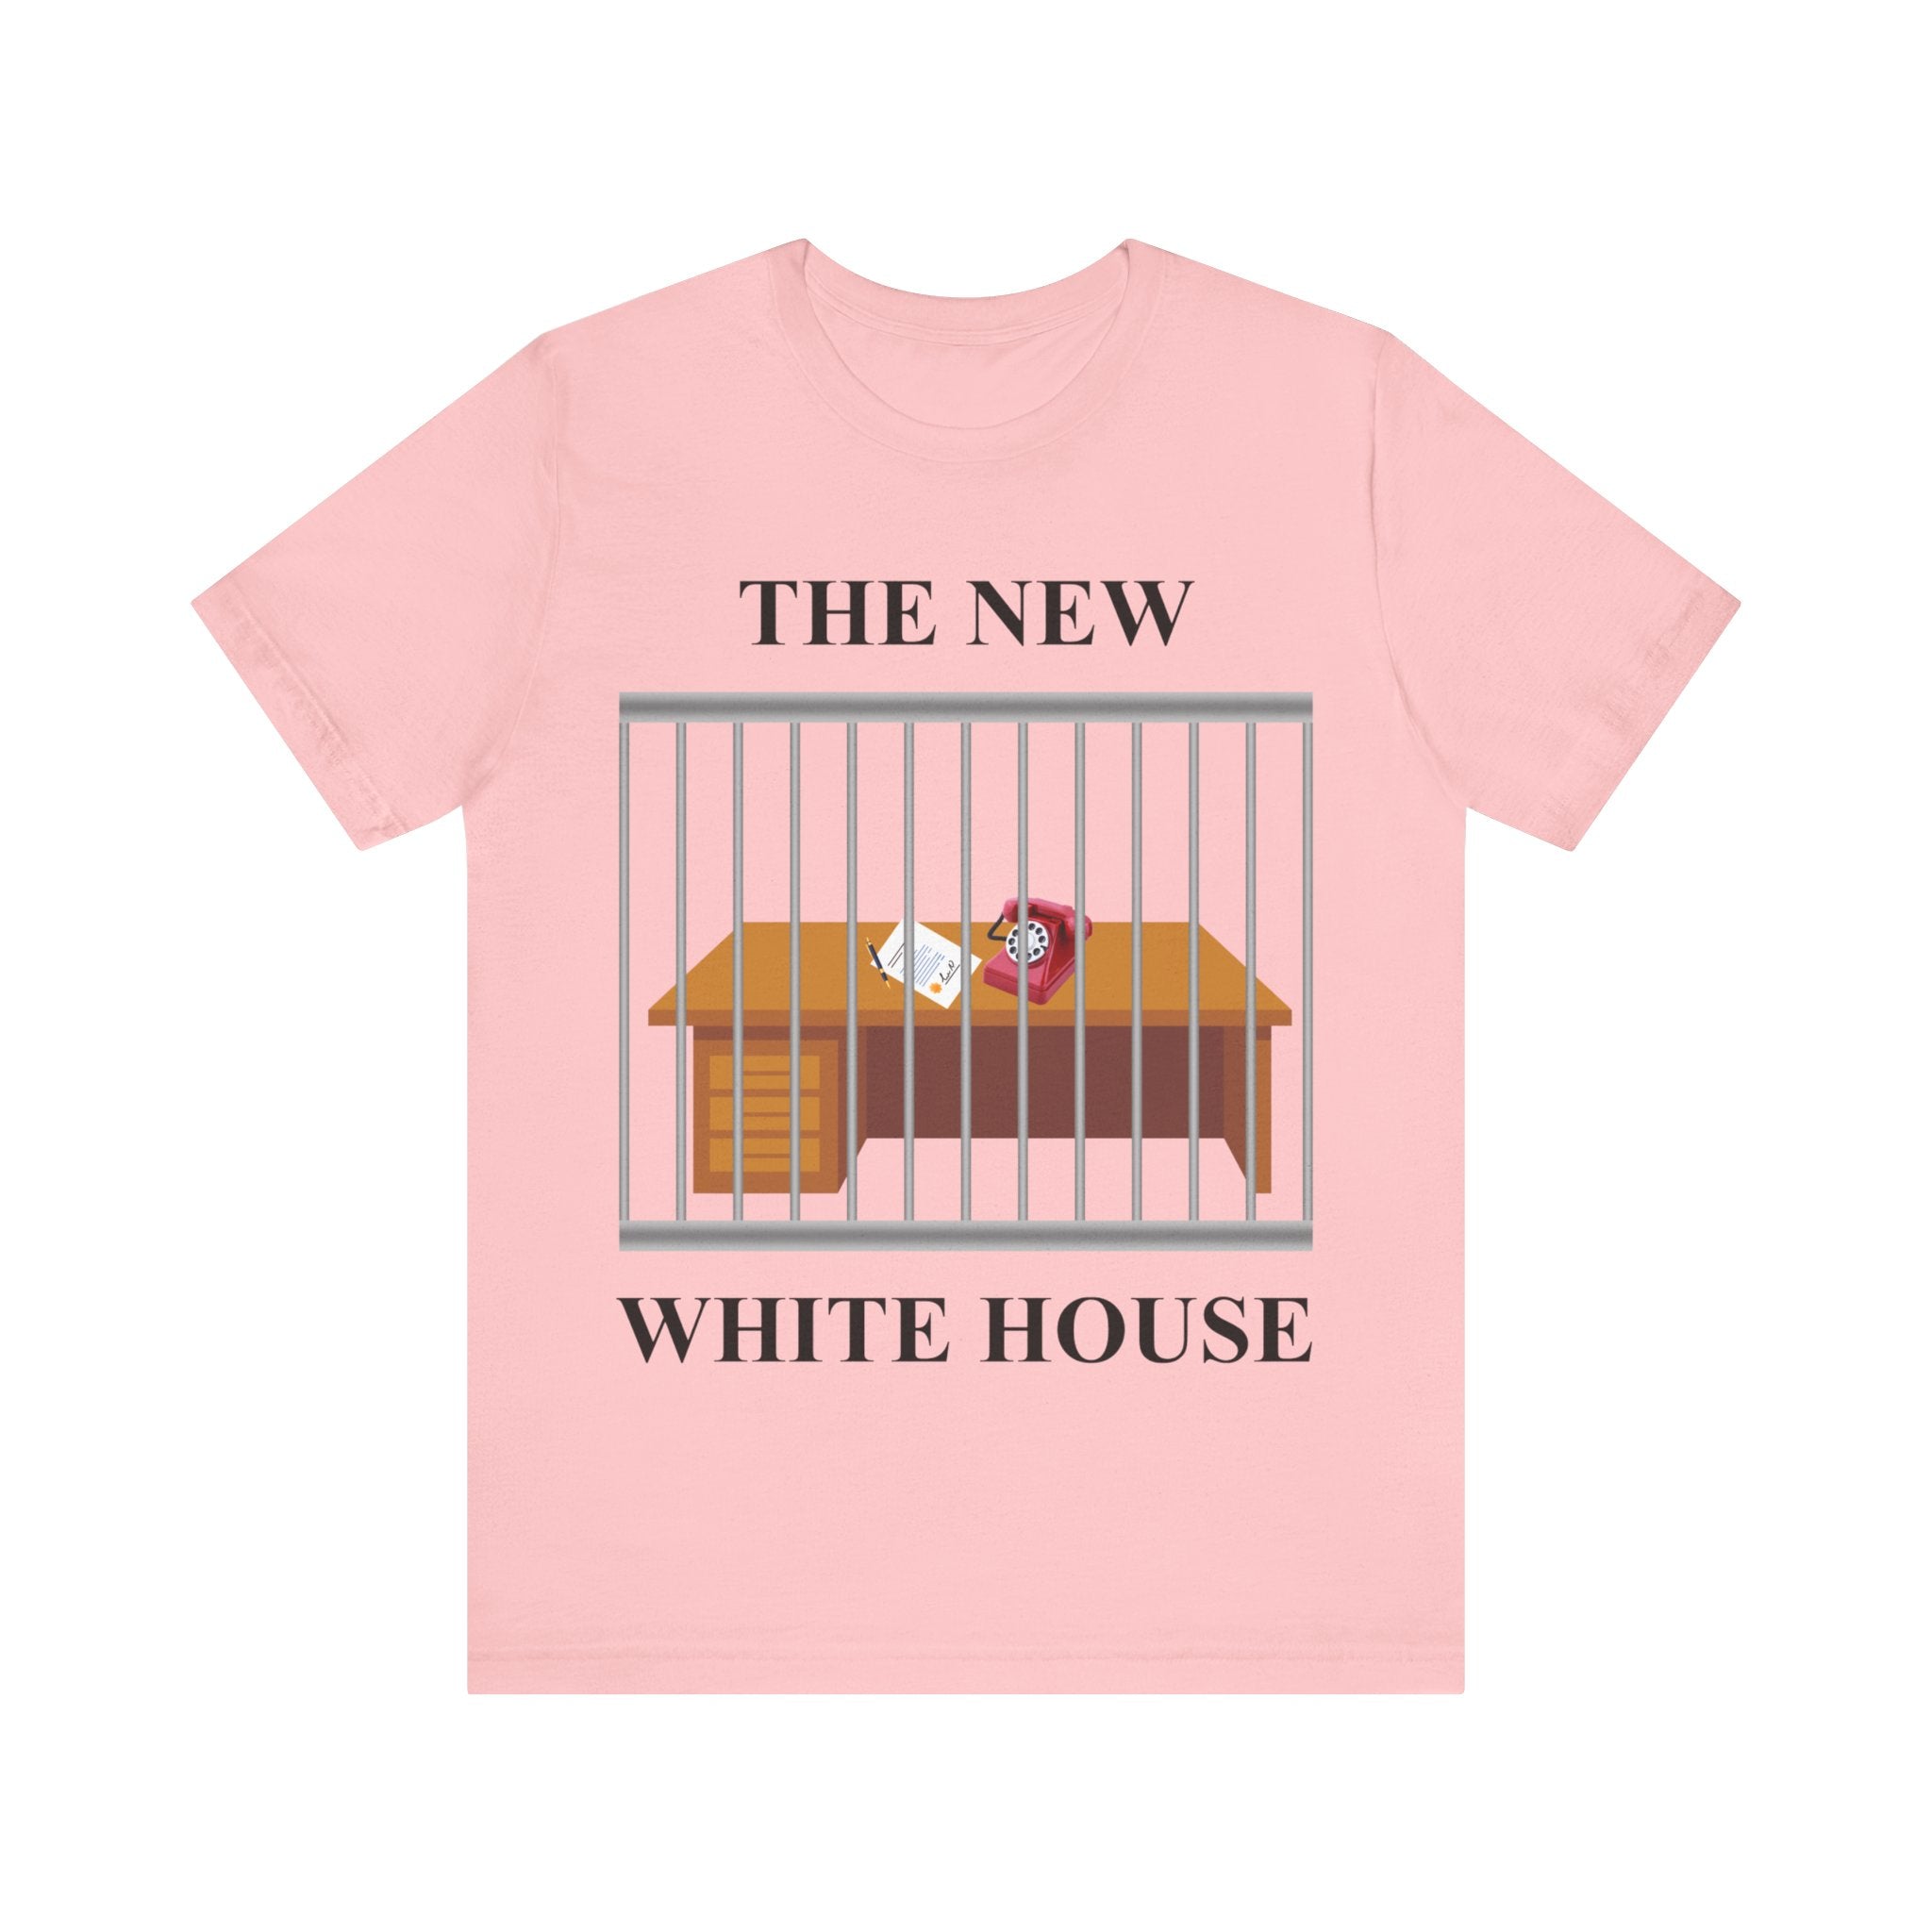 The New White House